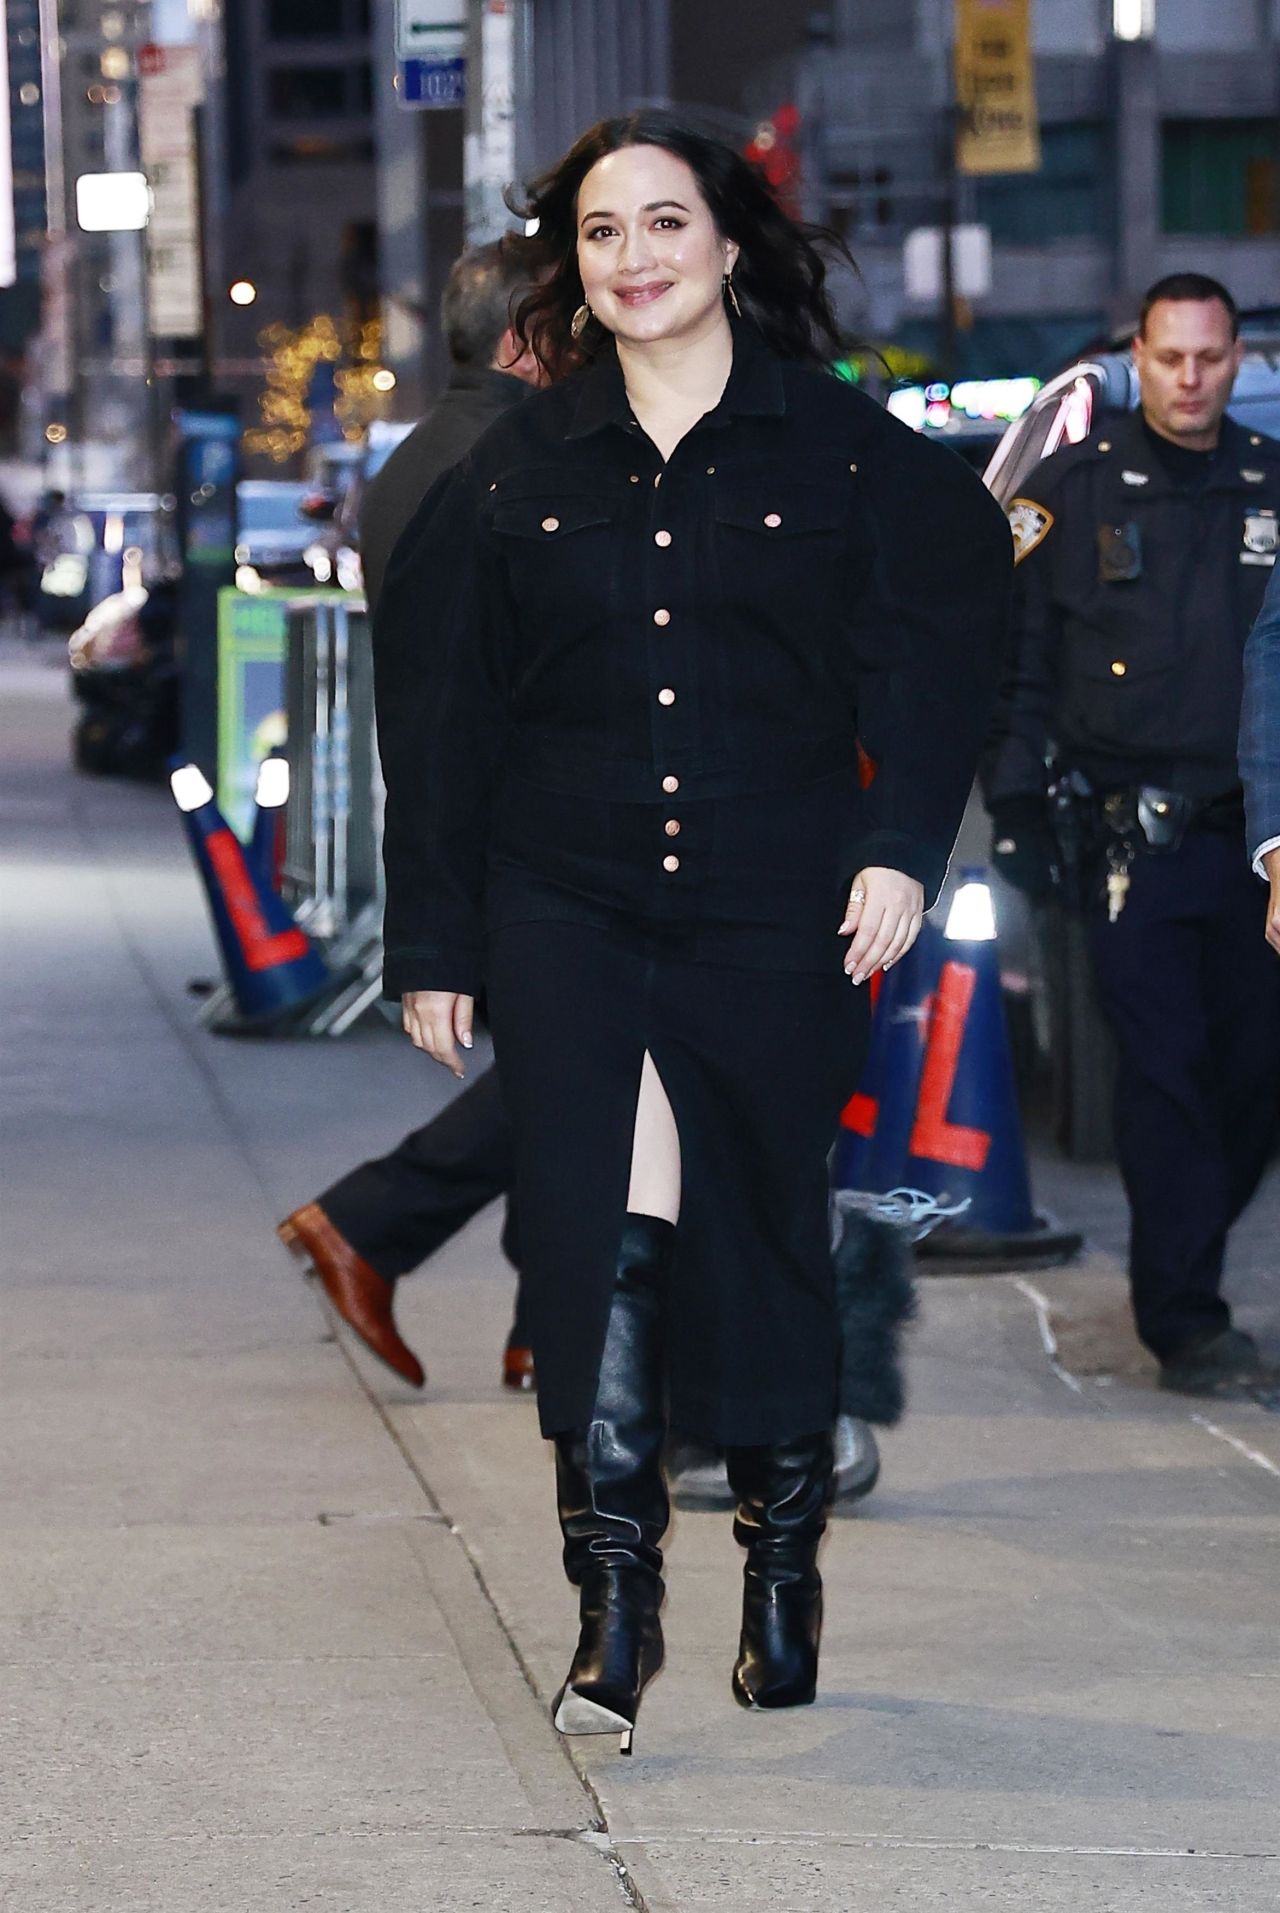 LILY GLADSTONE ARRIVING AT THE LATE SHOW WITH STEPHEN COLBERT IN NEW YORK